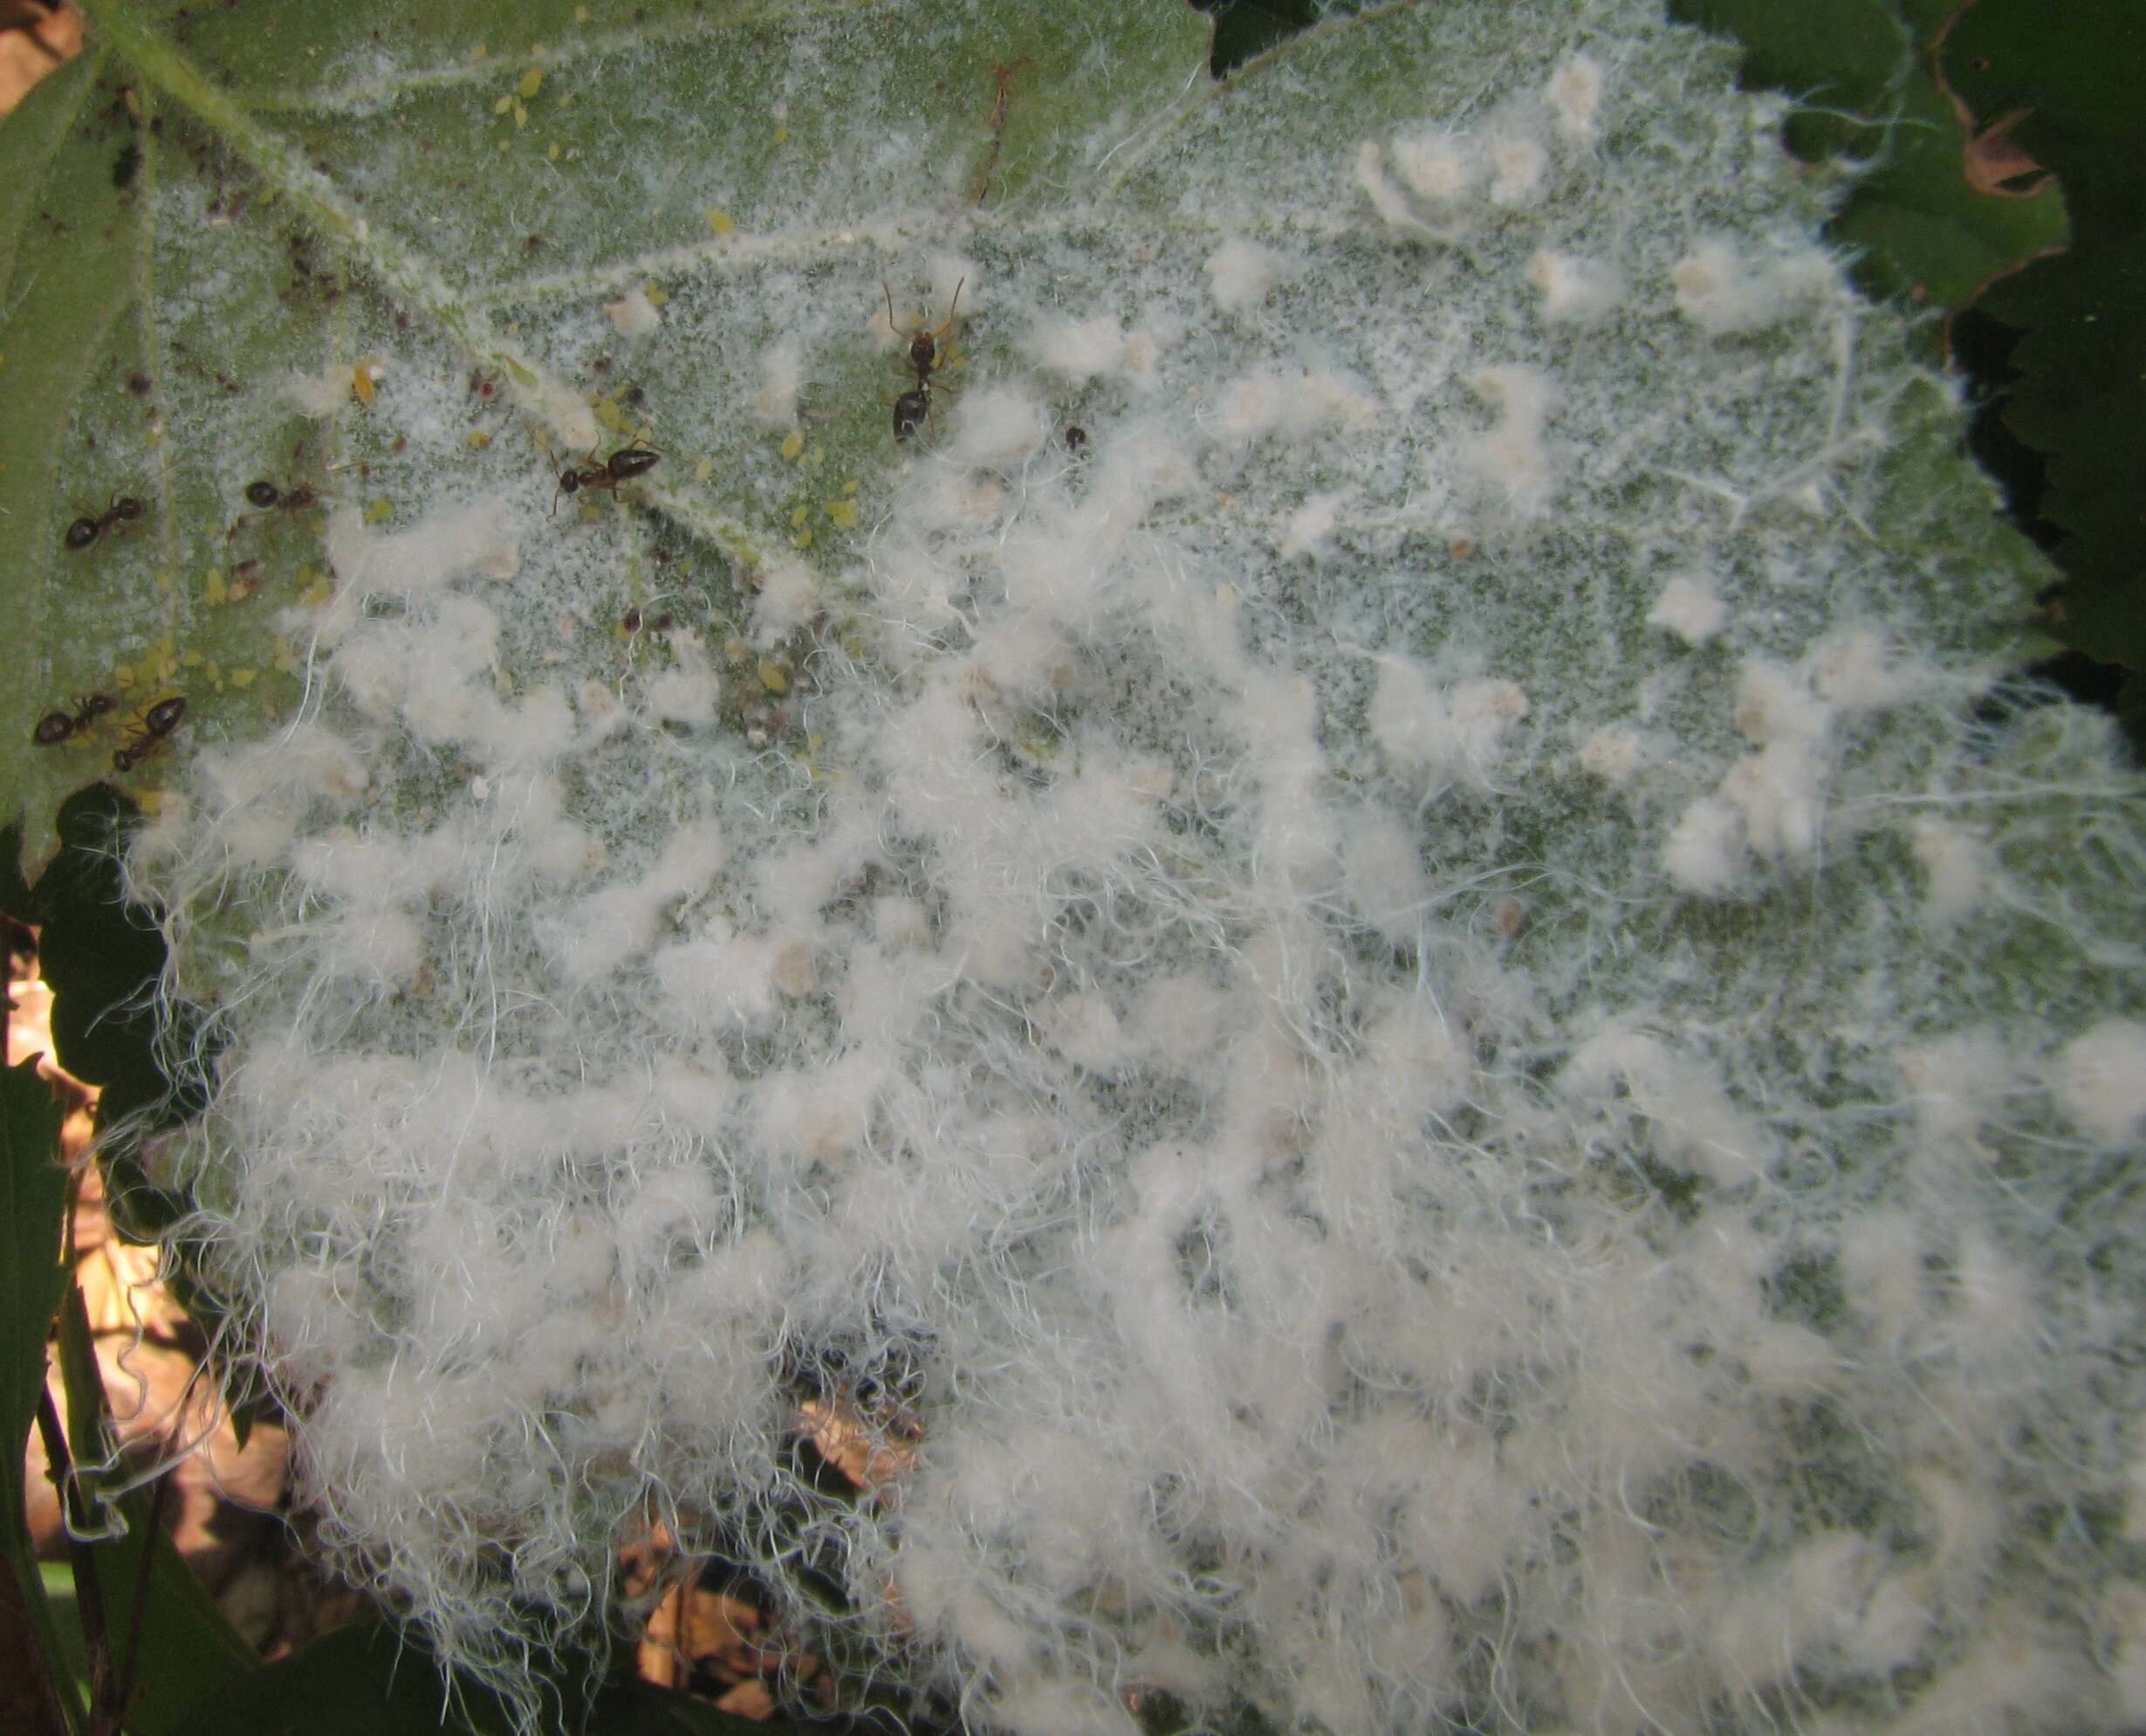 Image of jumping plant lice